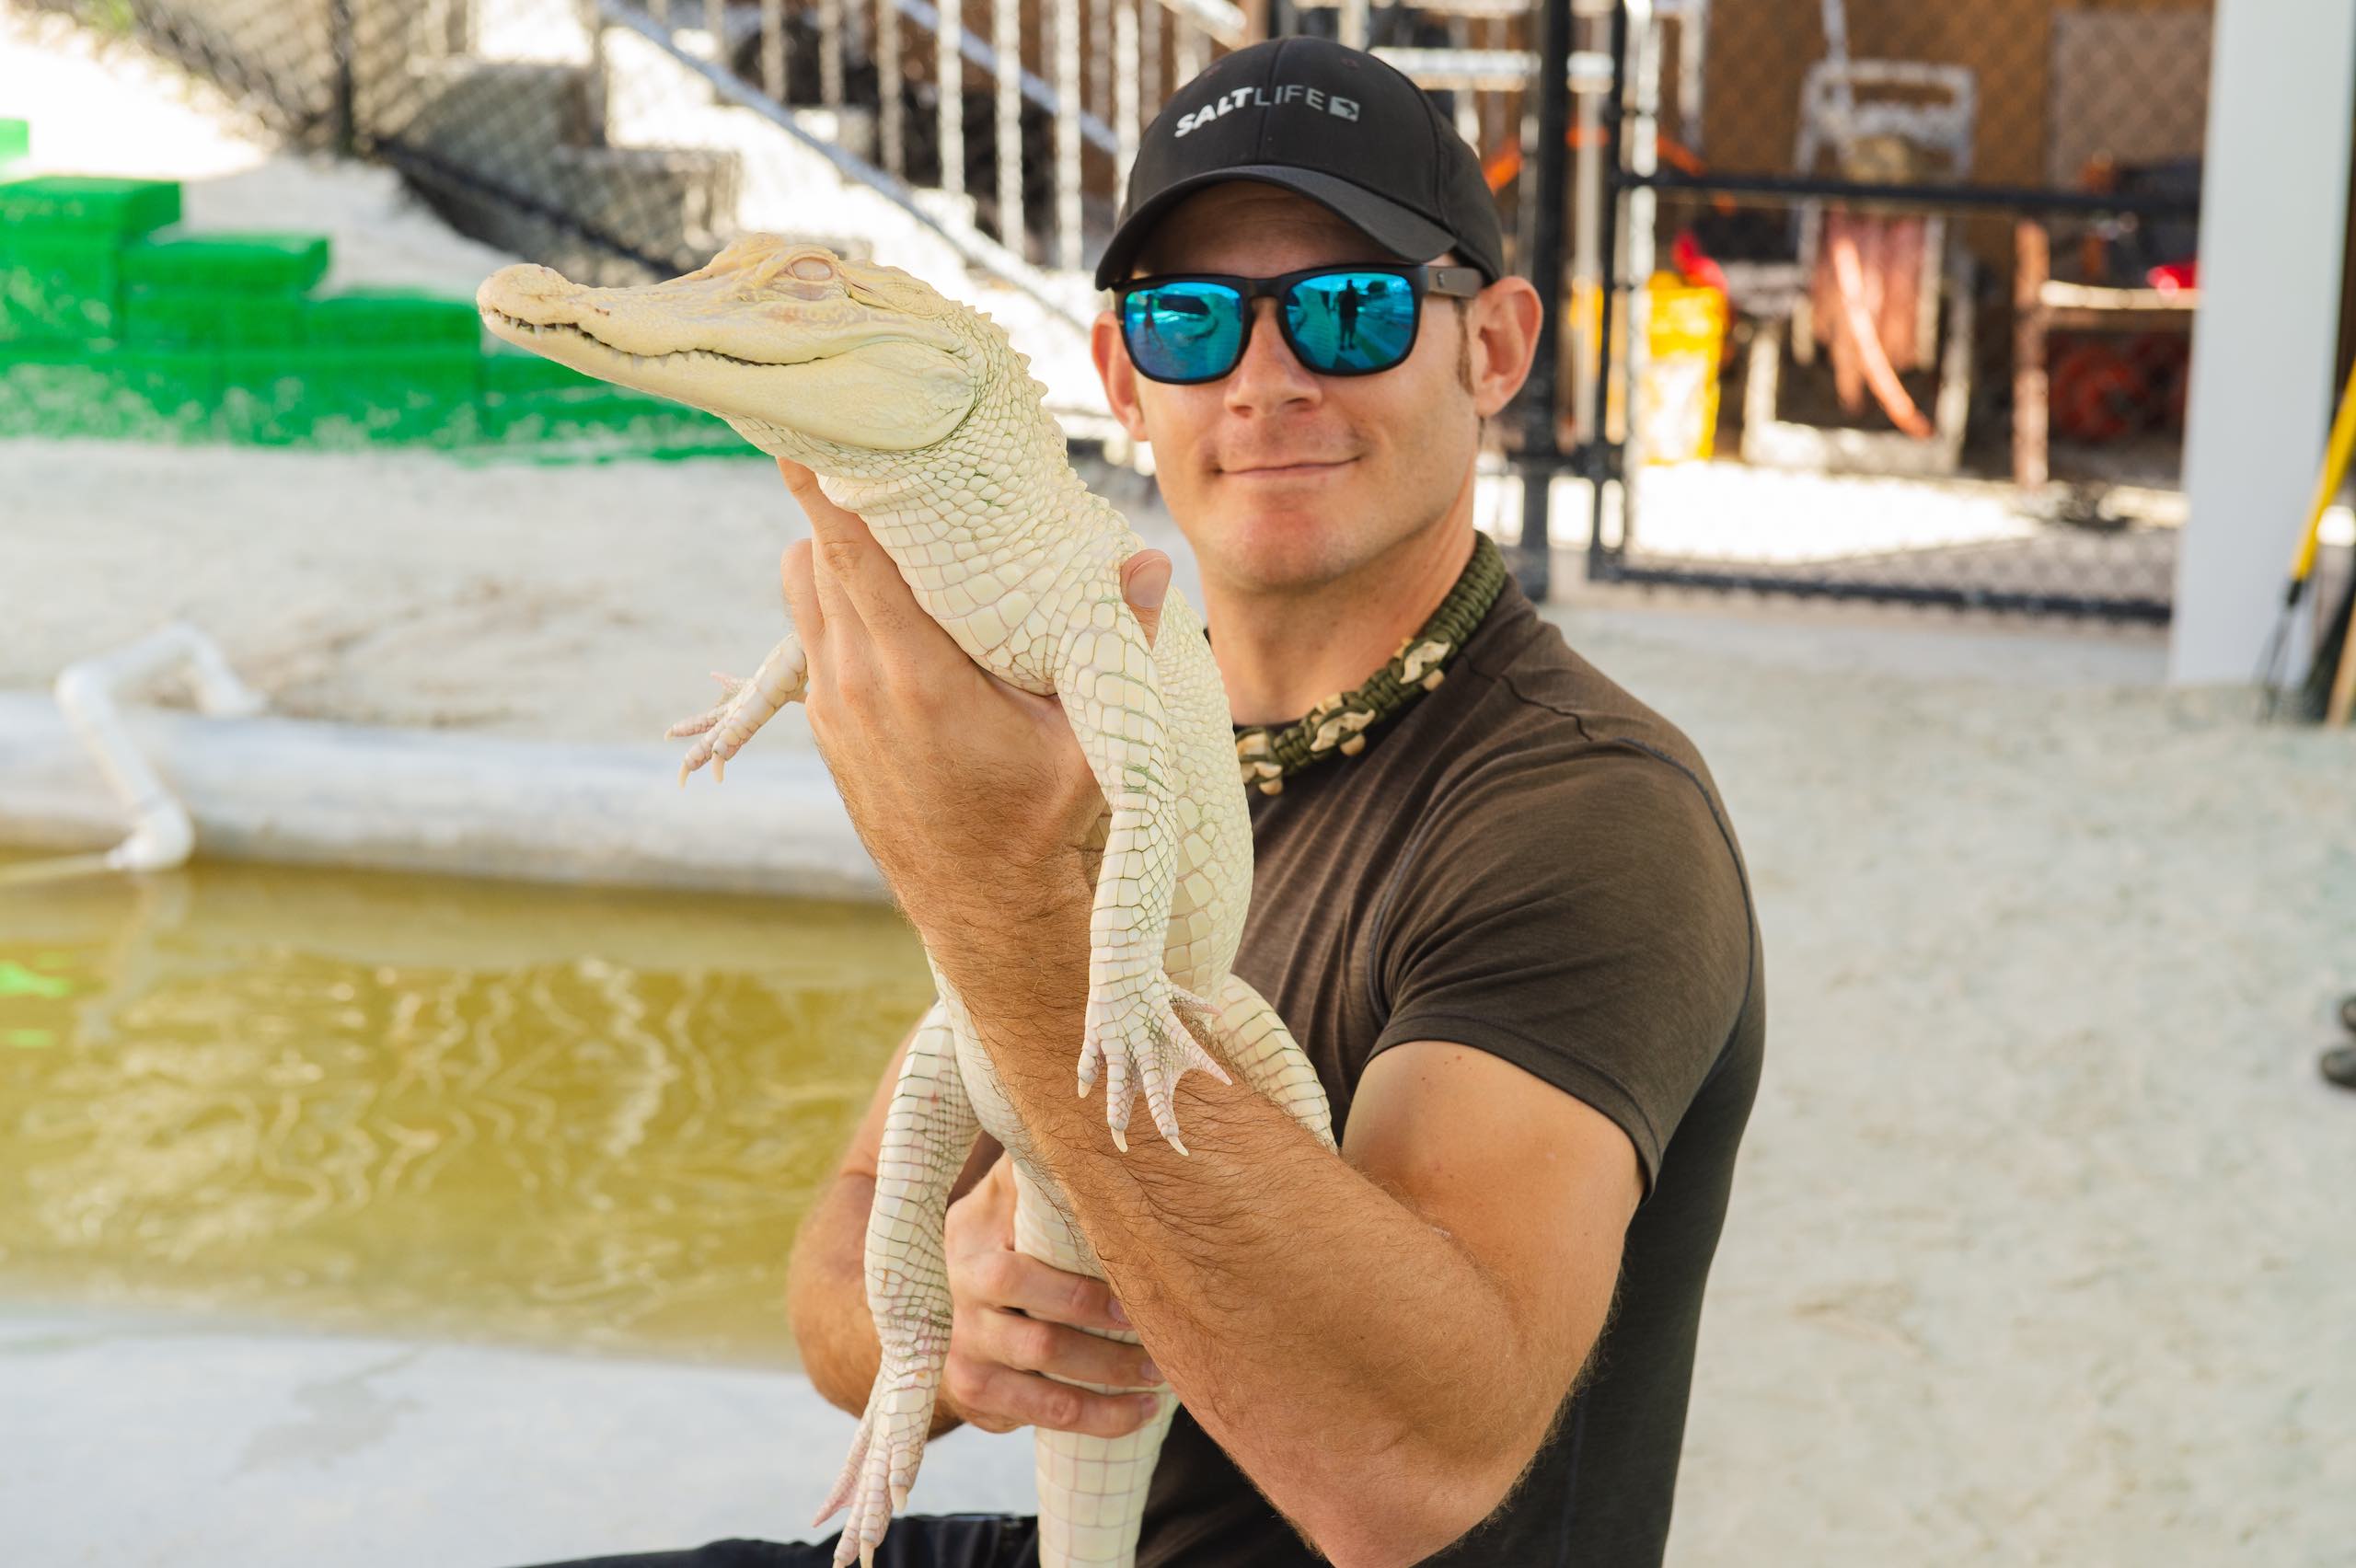 Everglades Holiday Park Muscular man wearing black cap and mirror shades posing with an albino alligator in a sand pit